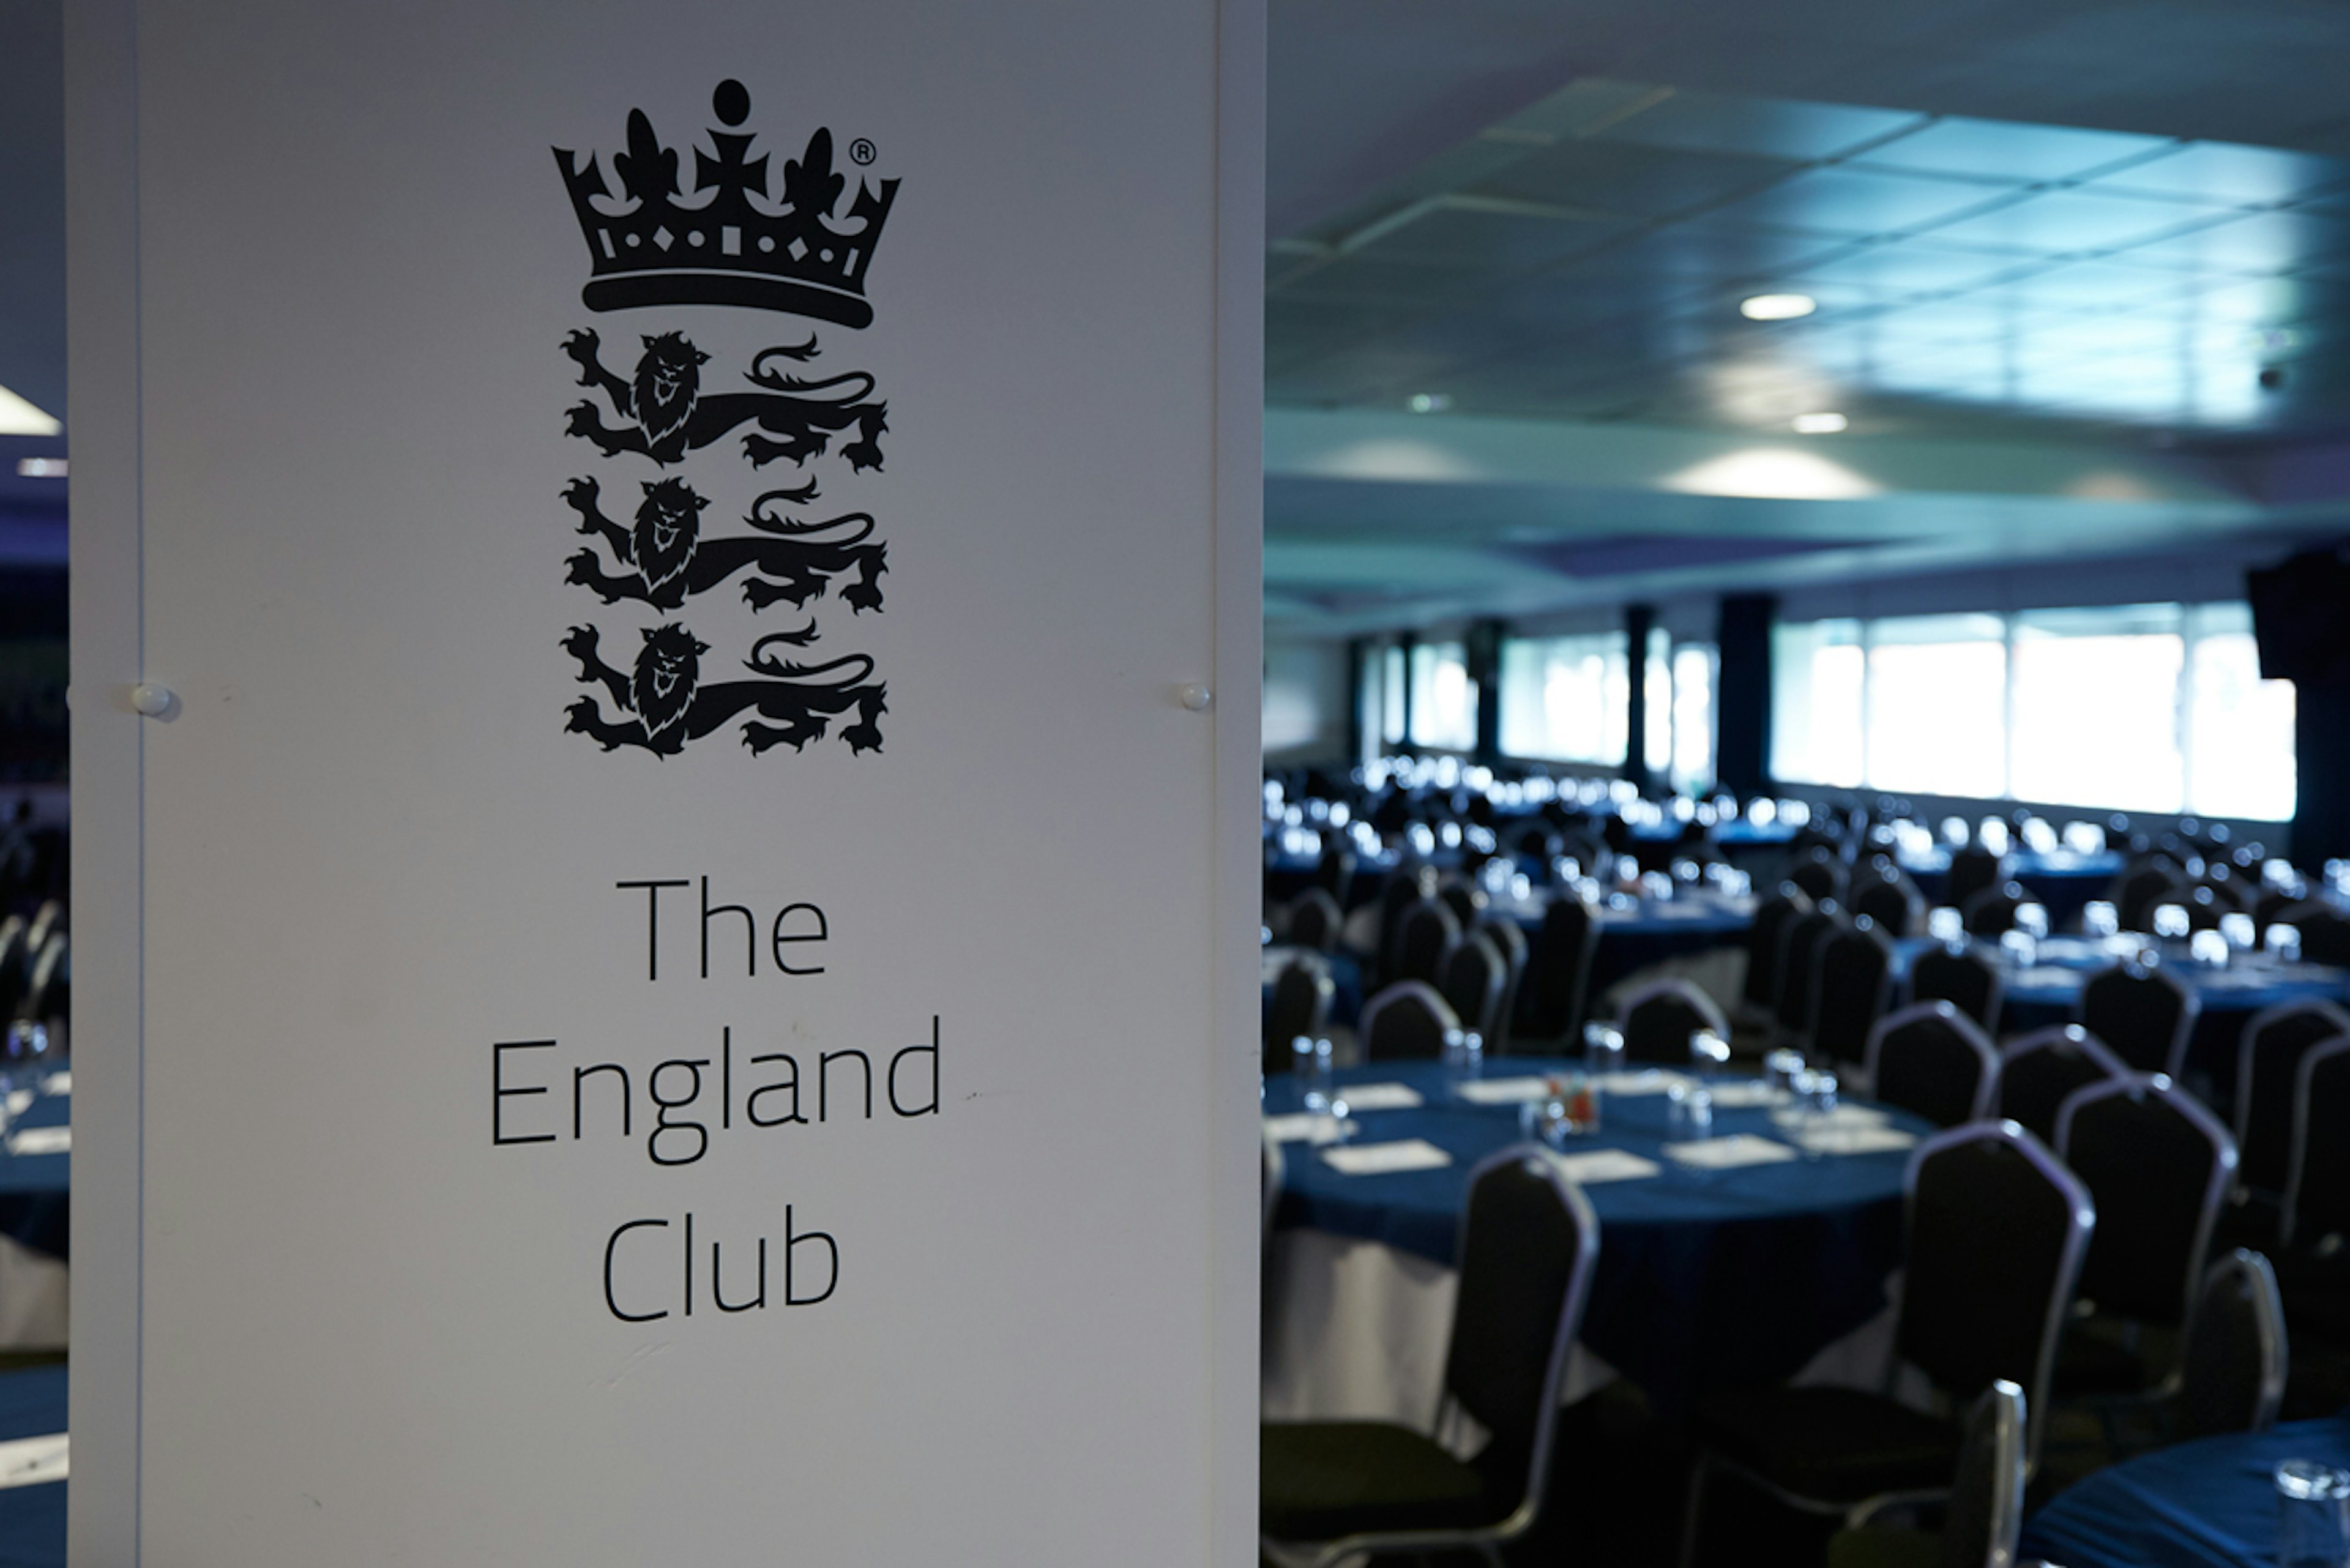 Exhibition Venues - Kia Oval - Business in England Suite - Banner